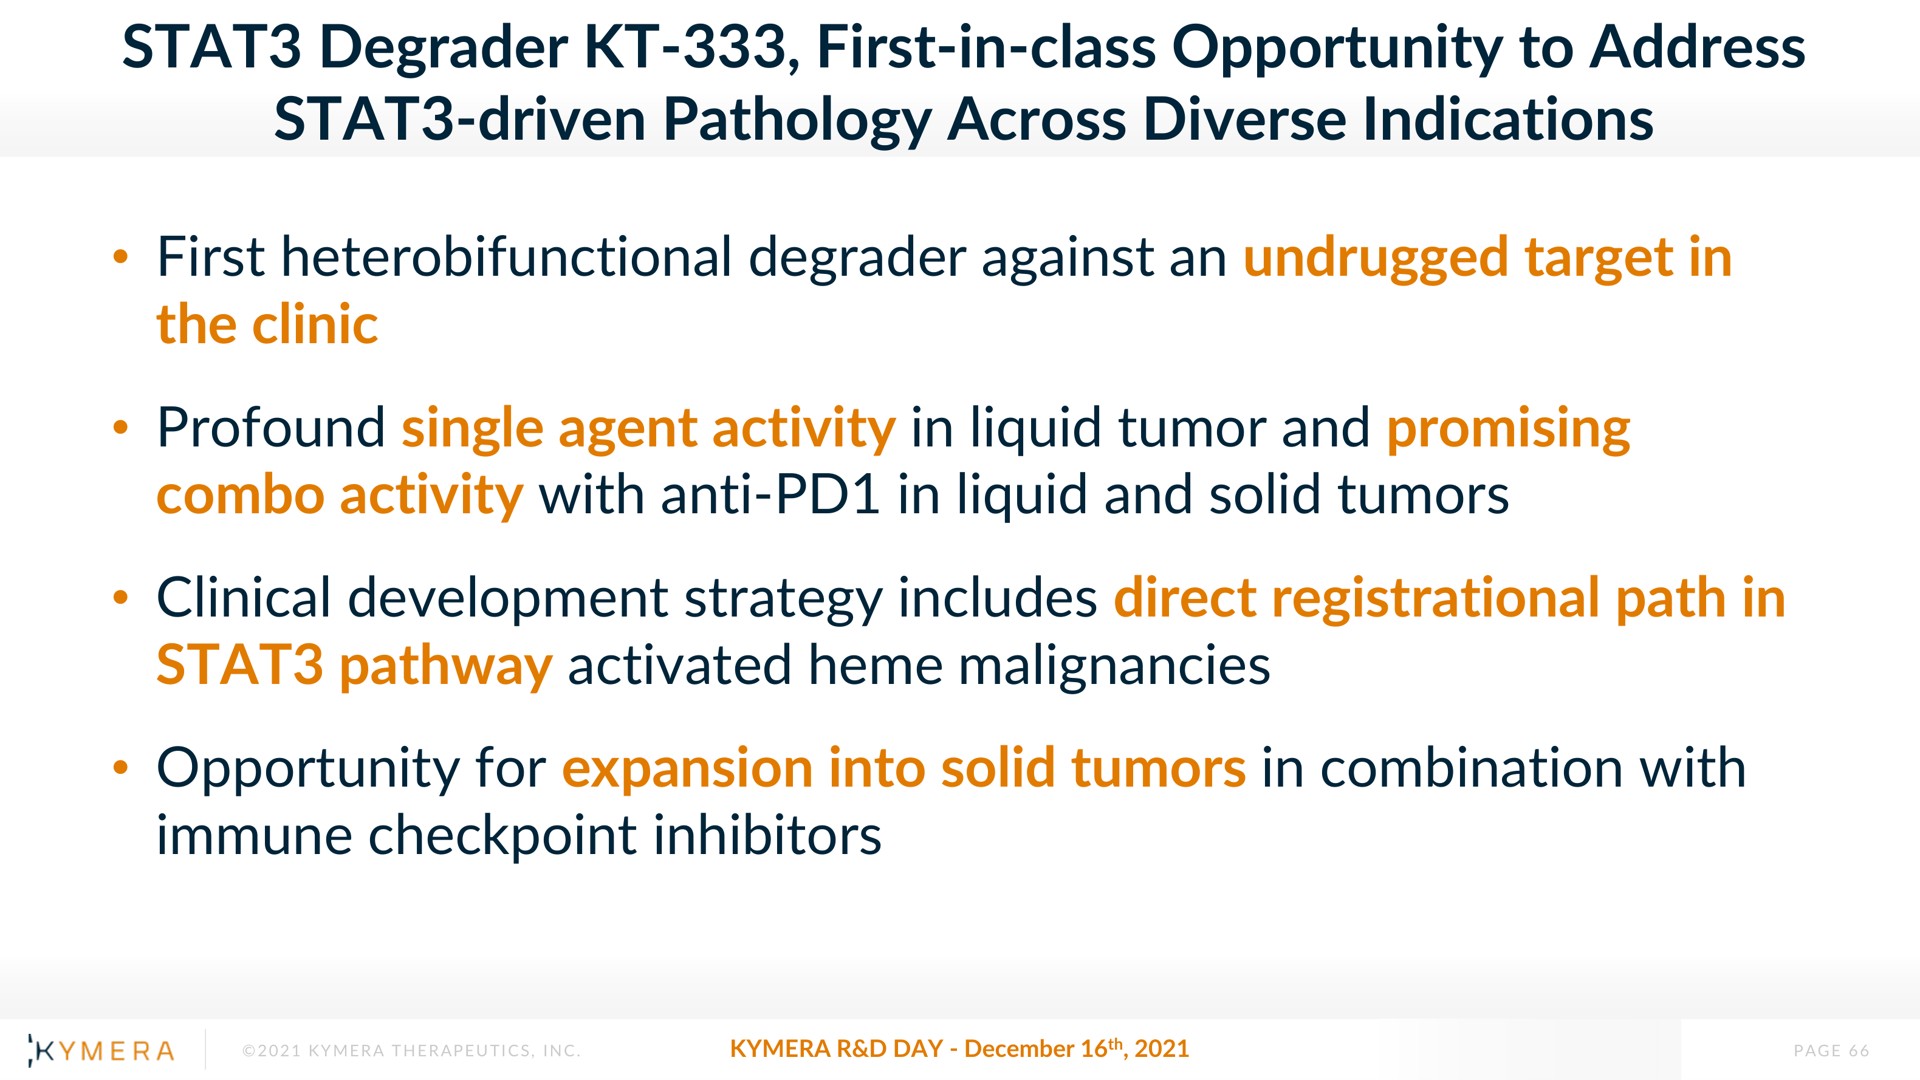 degrader first in class opportunity to address driven pathology across diverse indications first degrader against an undrugged target in the clinic profound single agent activity in liquid tumor and promising activity with anti in liquid and solid tumors clinical development strategy includes direct registrational path in pathway activated heme malignancies opportunity for expansion into solid tumors in combination with immune inhibitors | Kymera